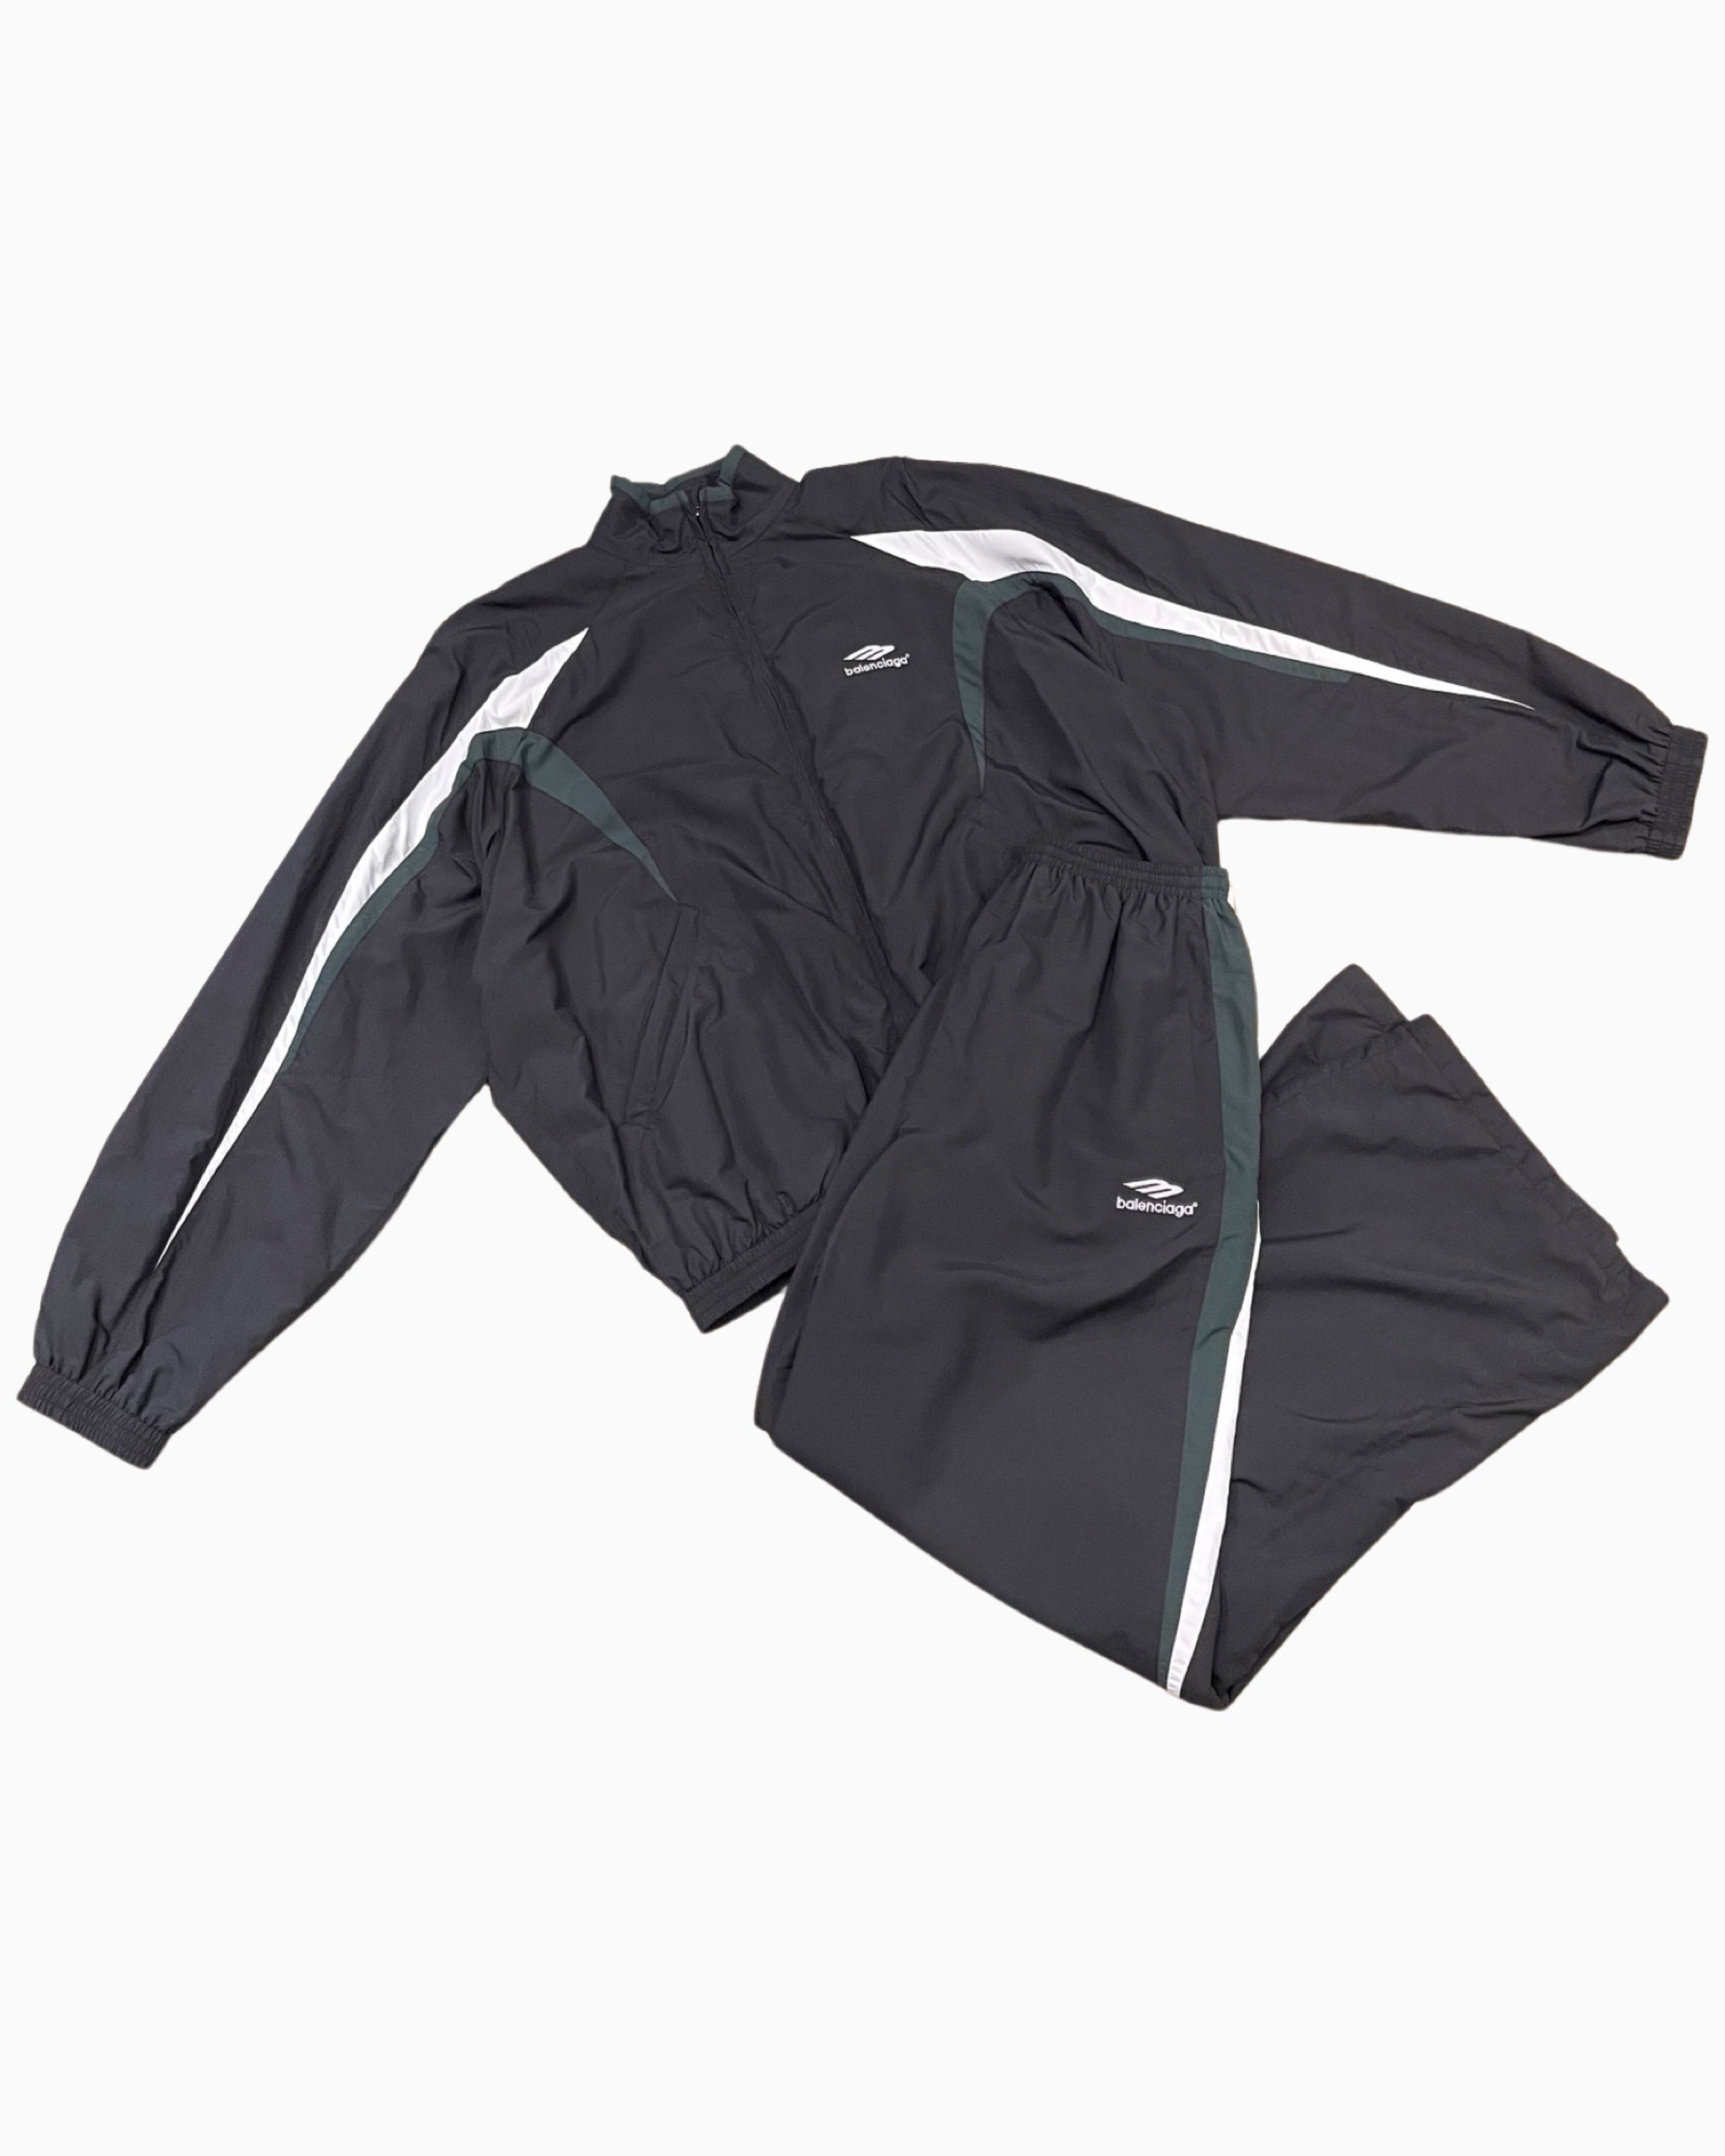 3b Sports Icon Tracksuit Pants in Black